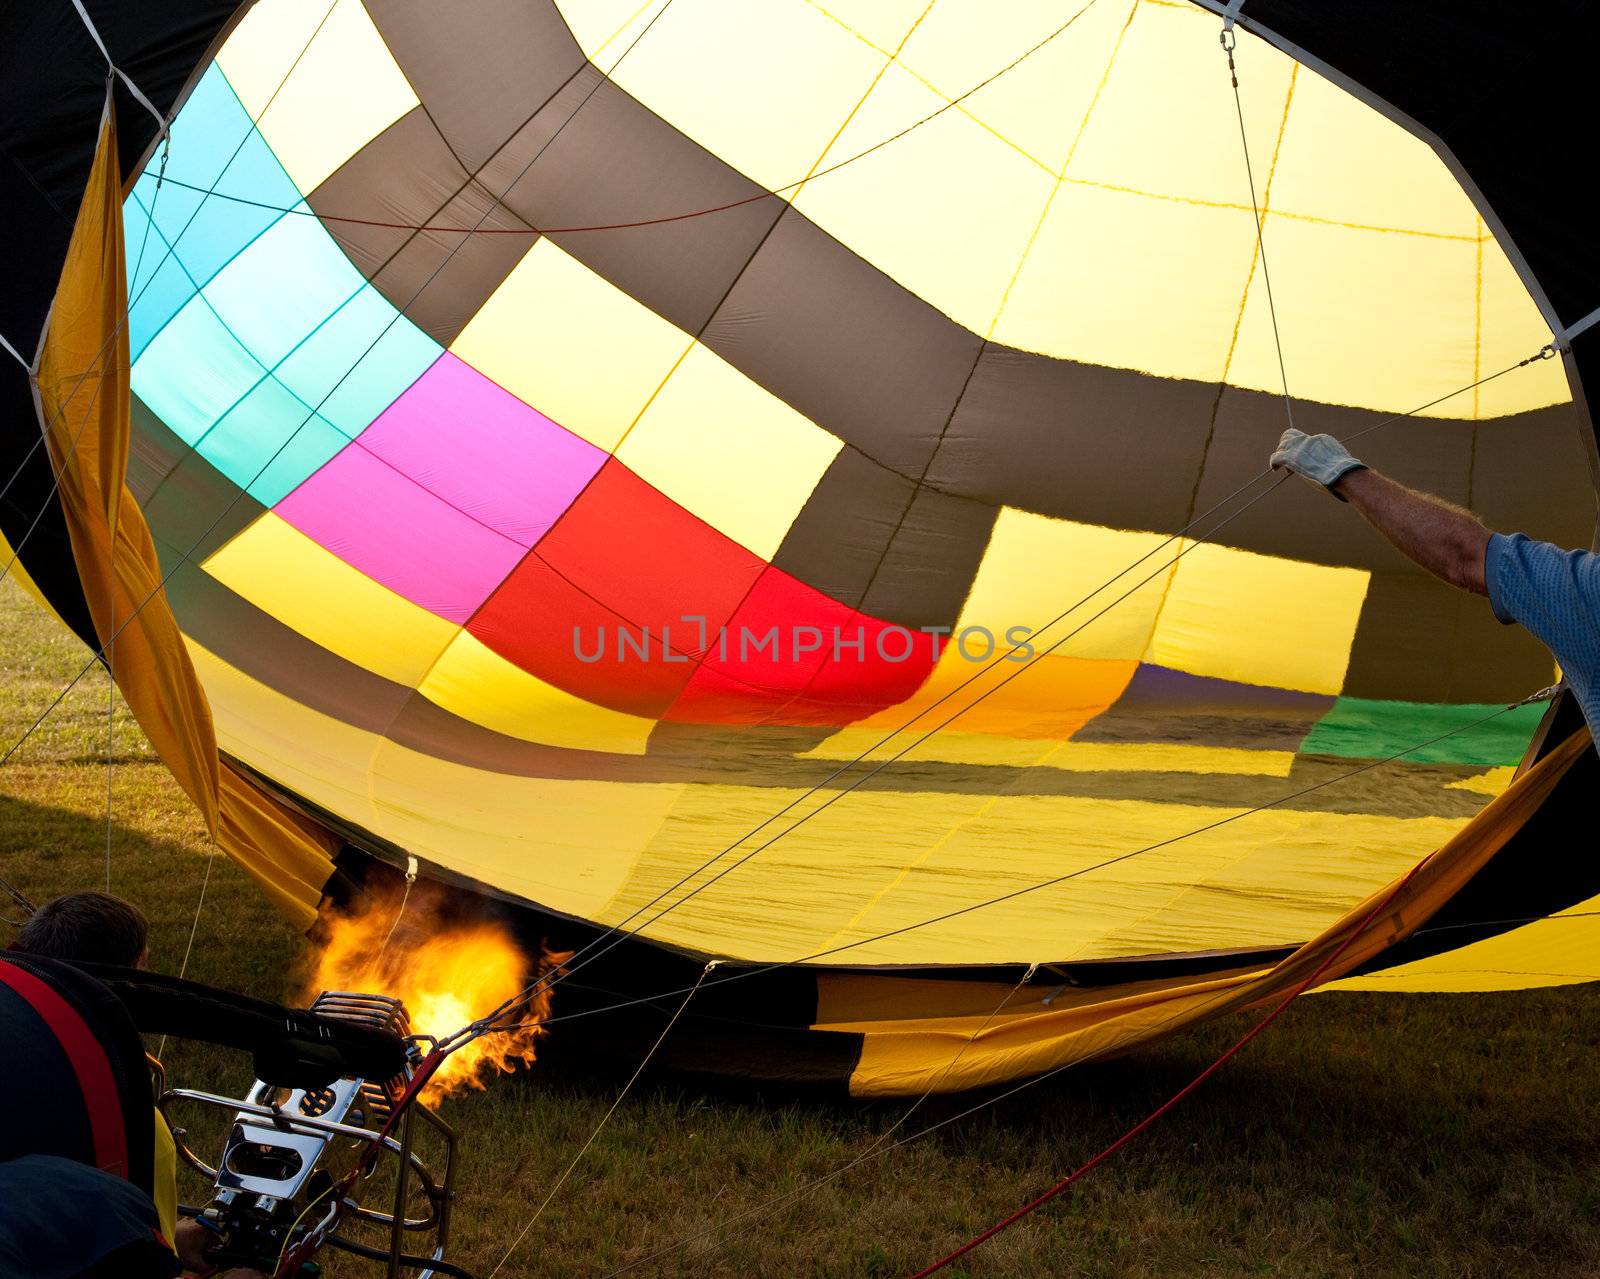 Hot air balloon inflation with flames by steheap